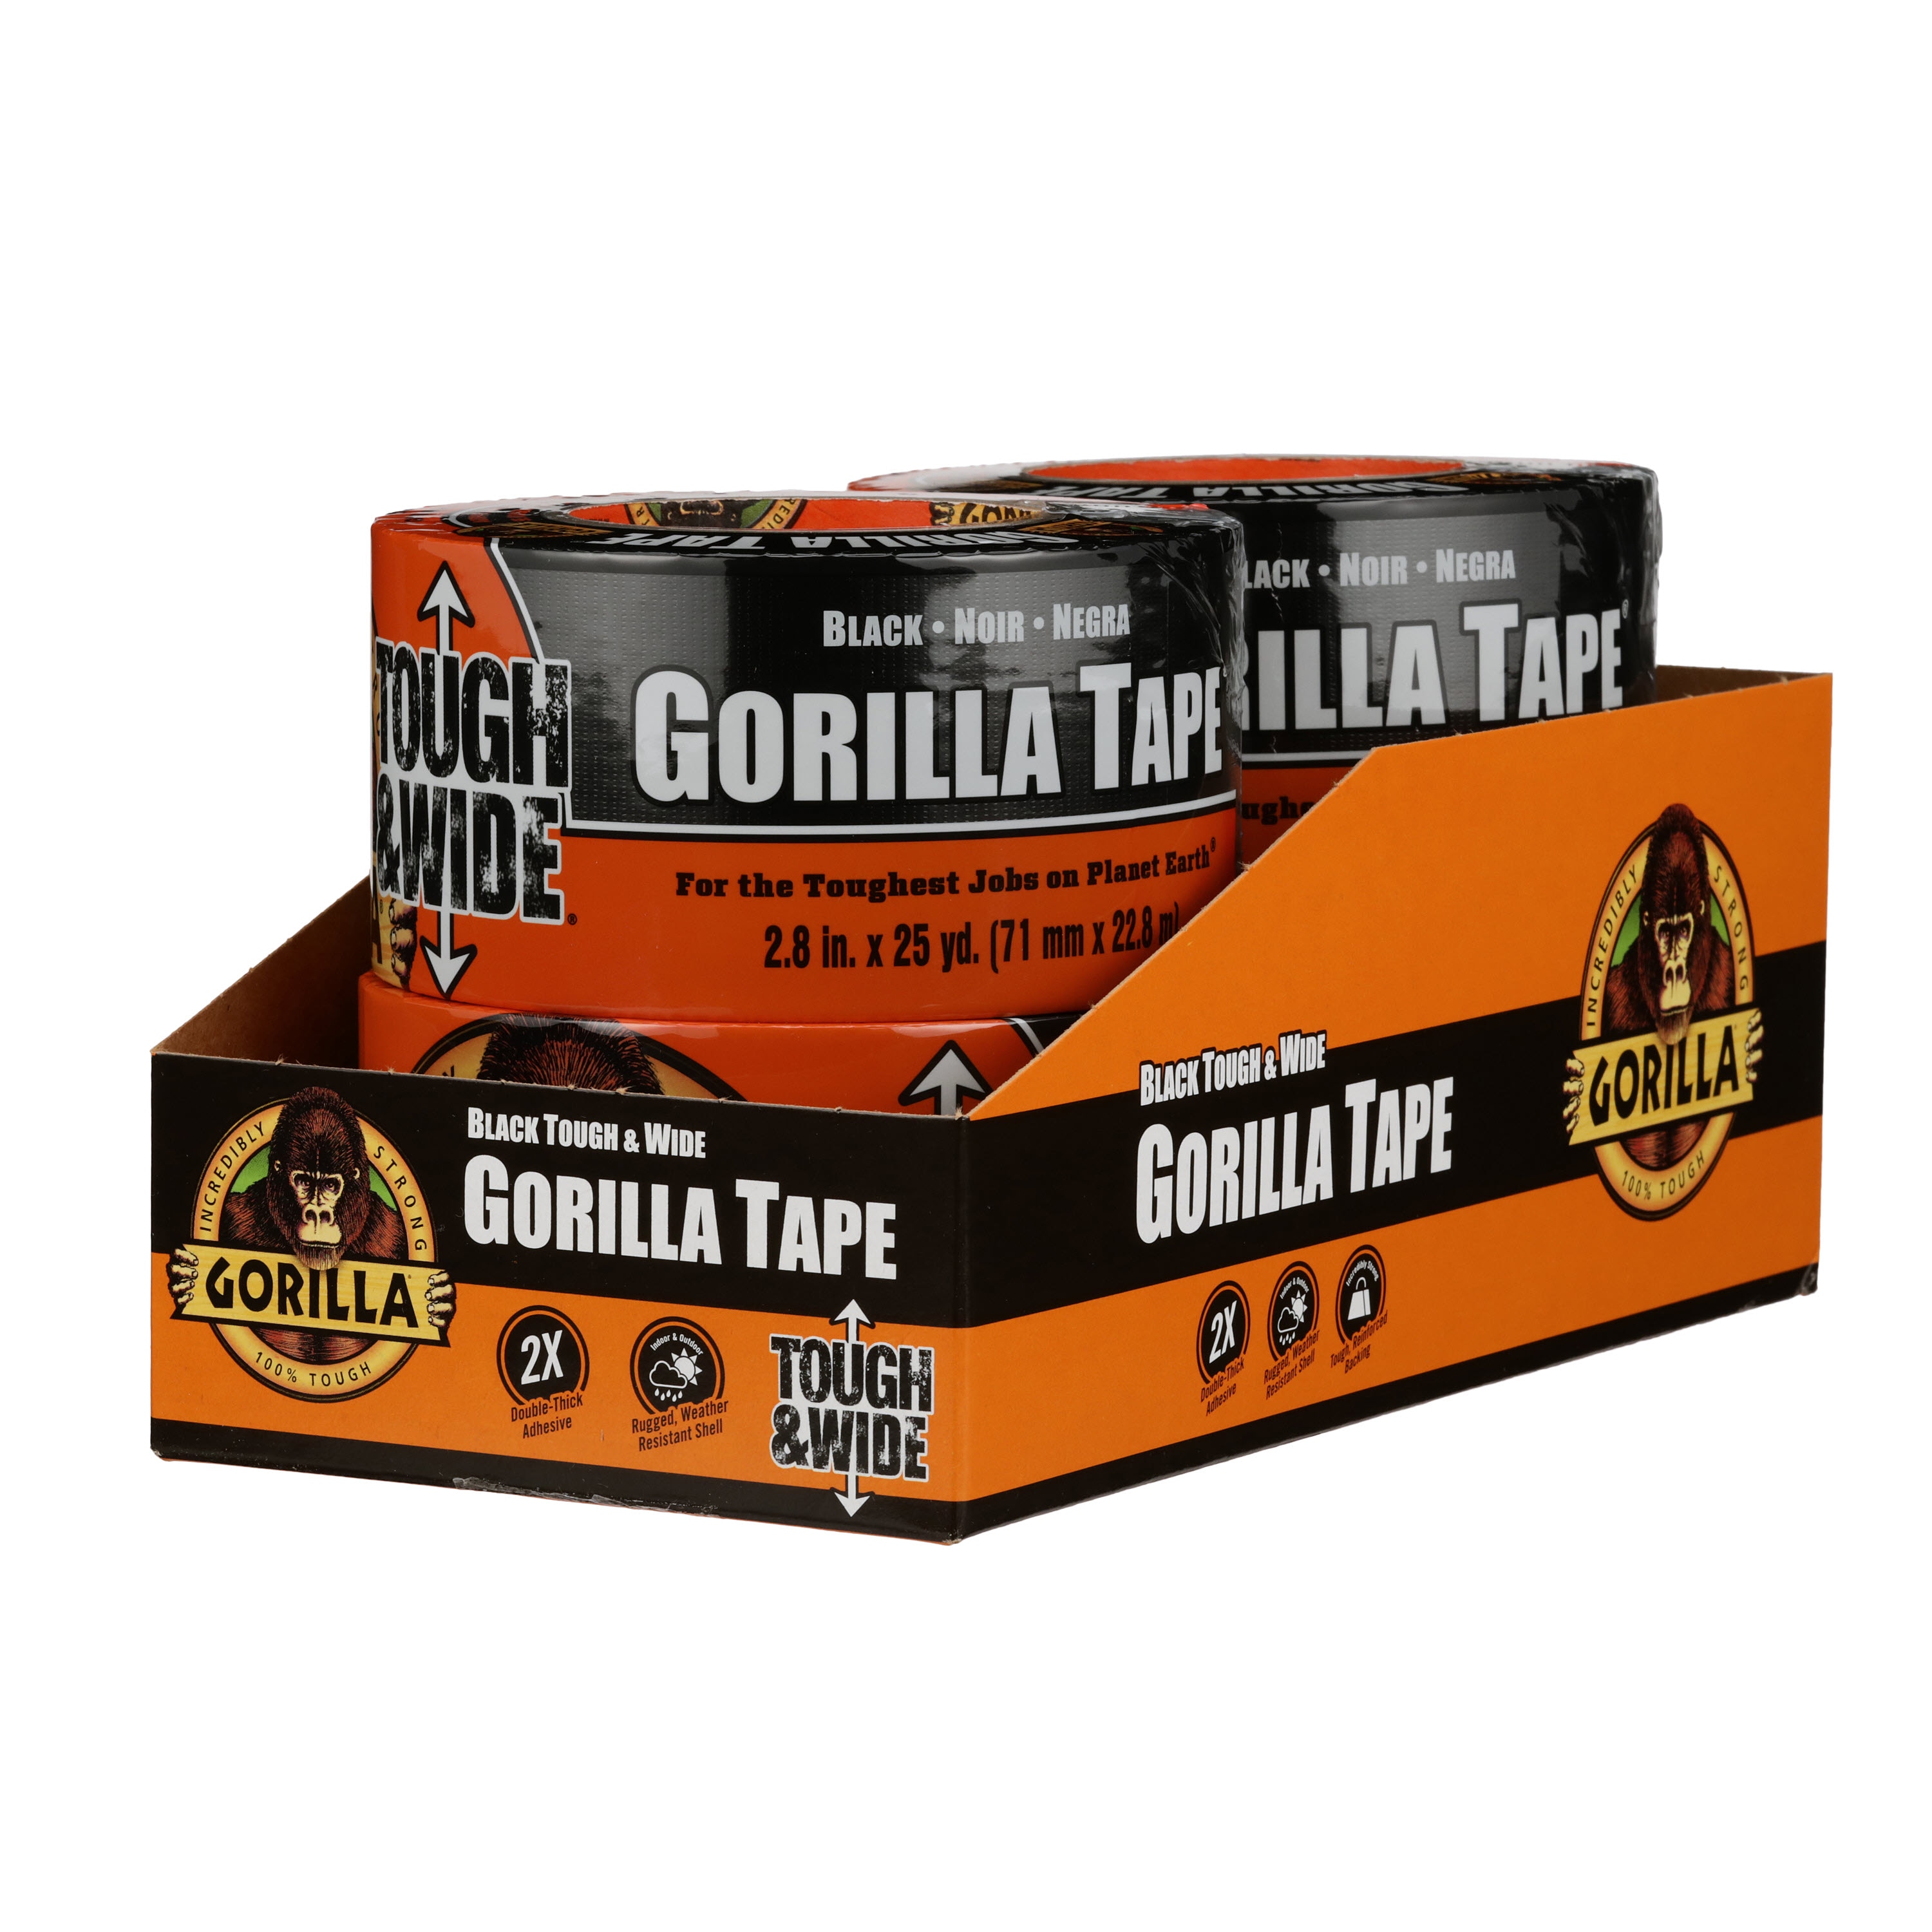 Gorilla 2.83 In. x 15 Yd. Crystal Clear Duct Tape, Clear - Henery